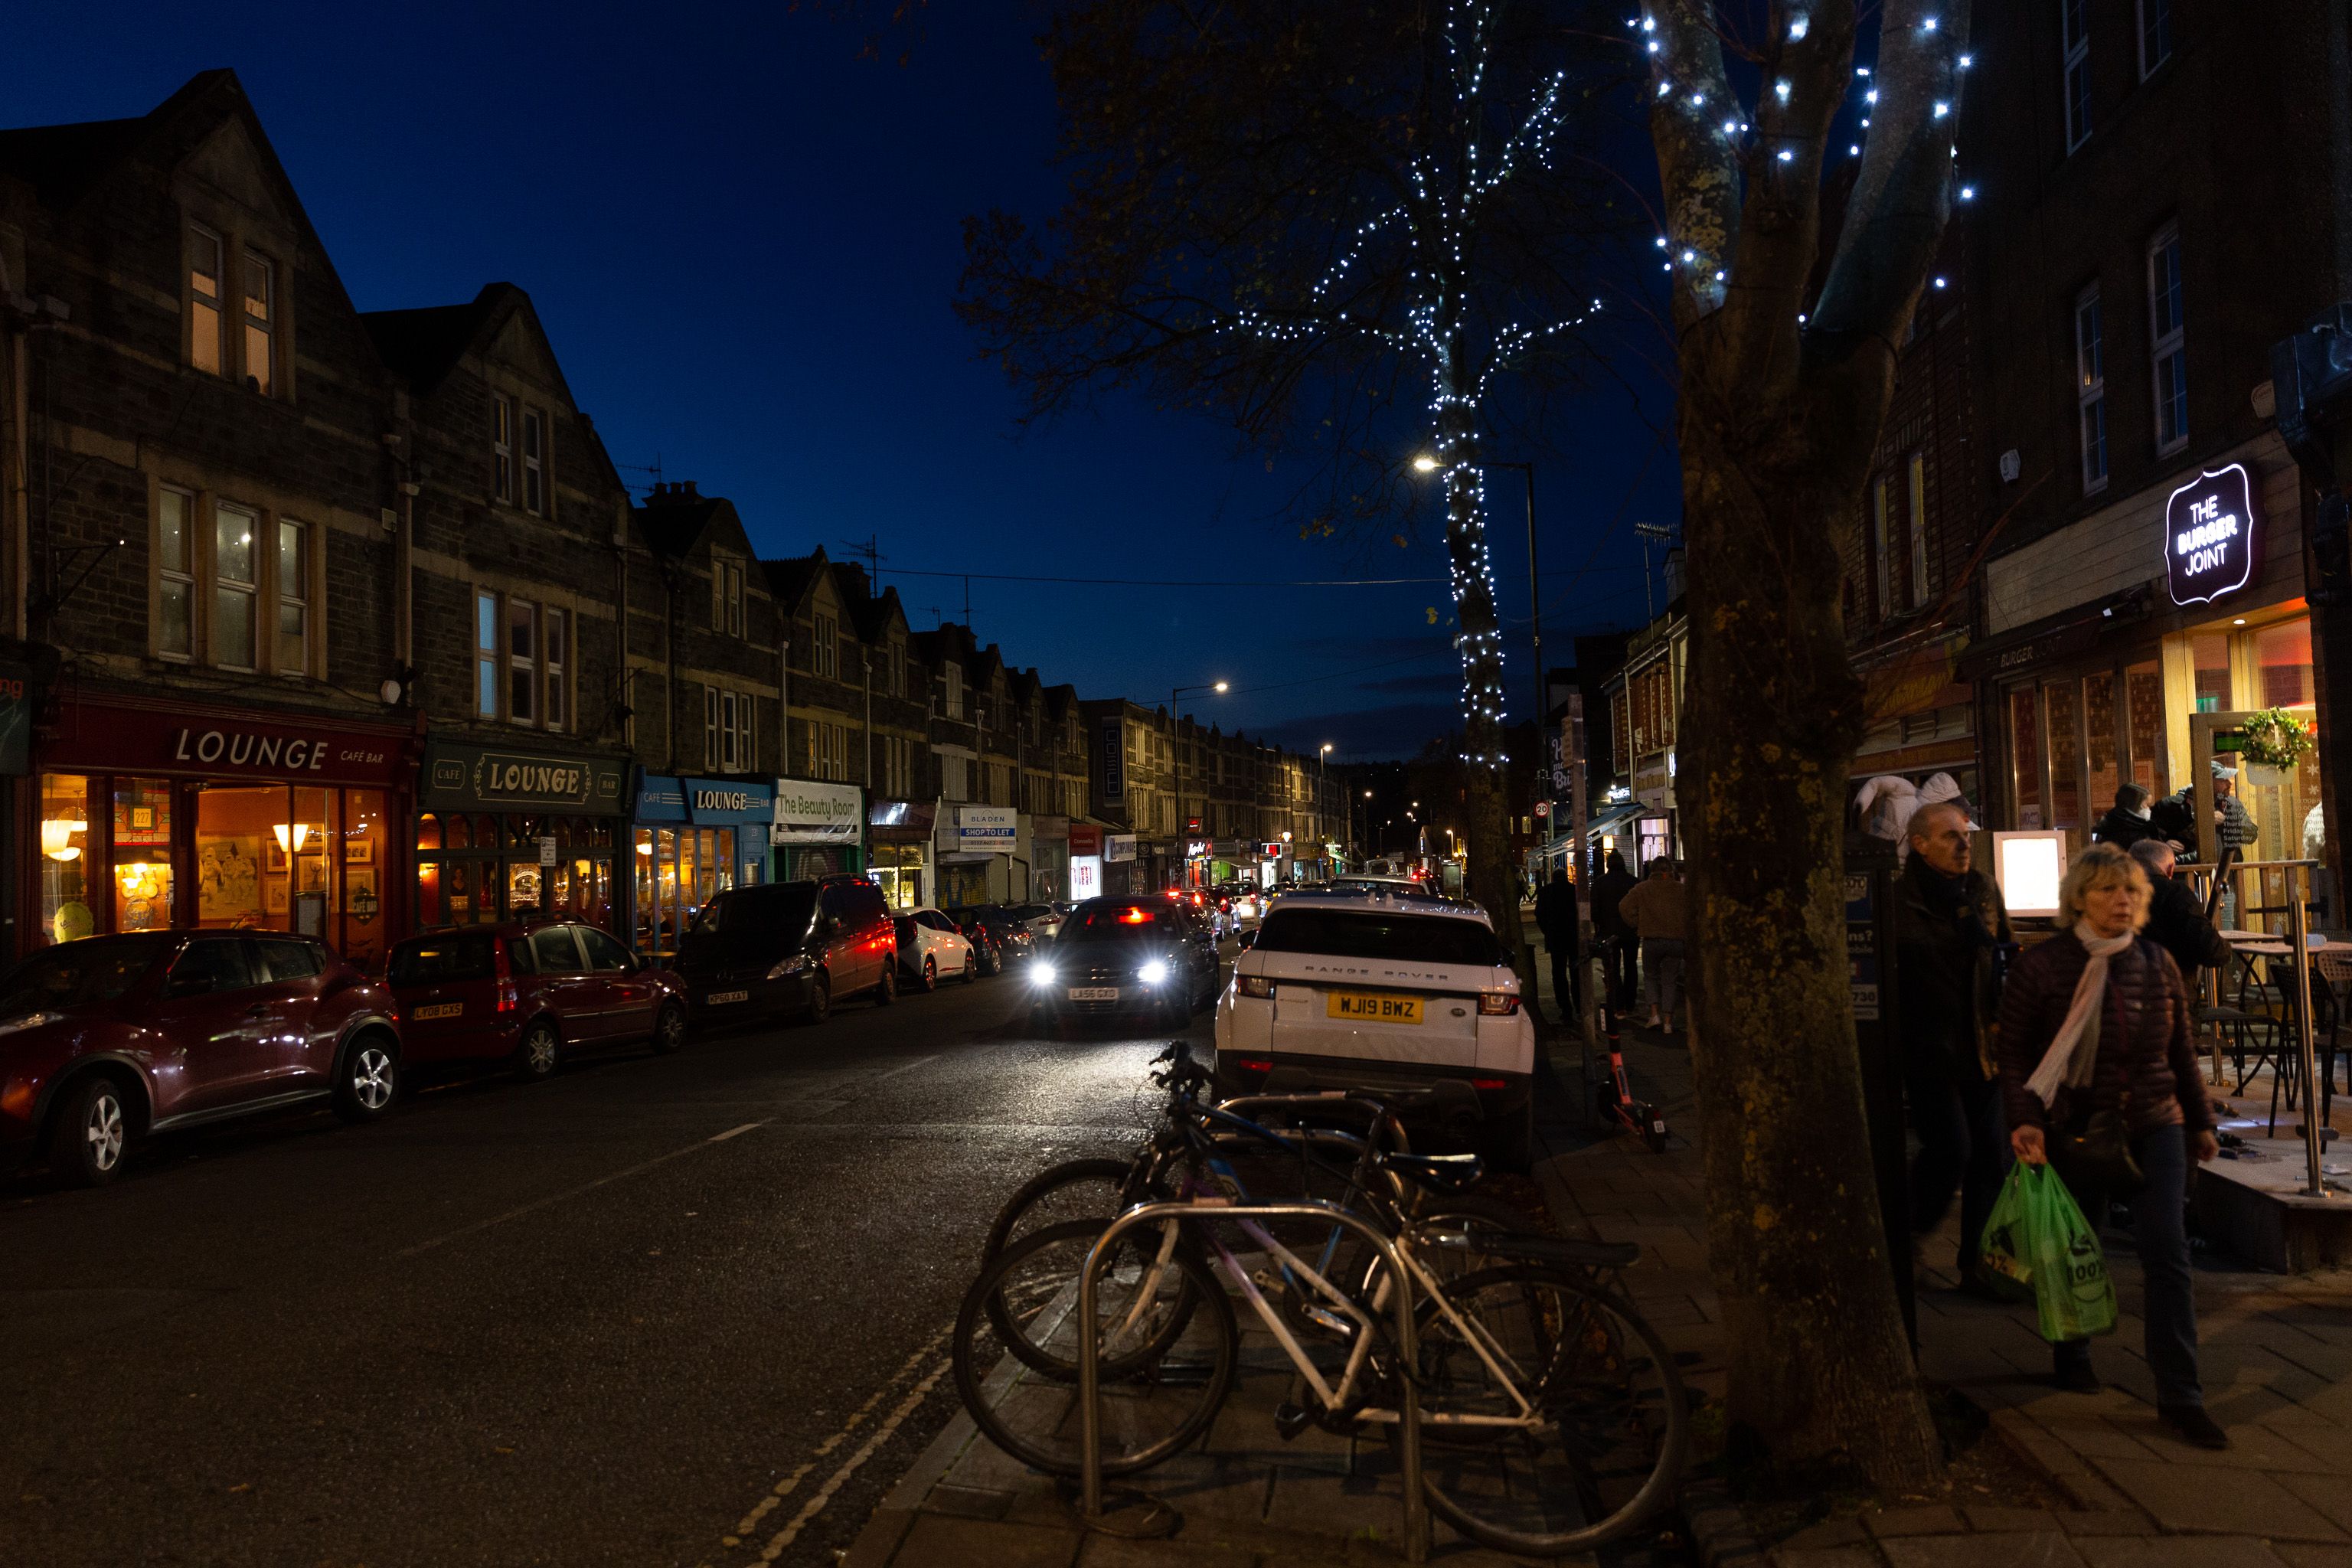 North Street Night 1
Night fell fairly fast on our way from our mulled wine at The Ashton to North Street to have a poke around the stock of Storysmith bookshop in thei...